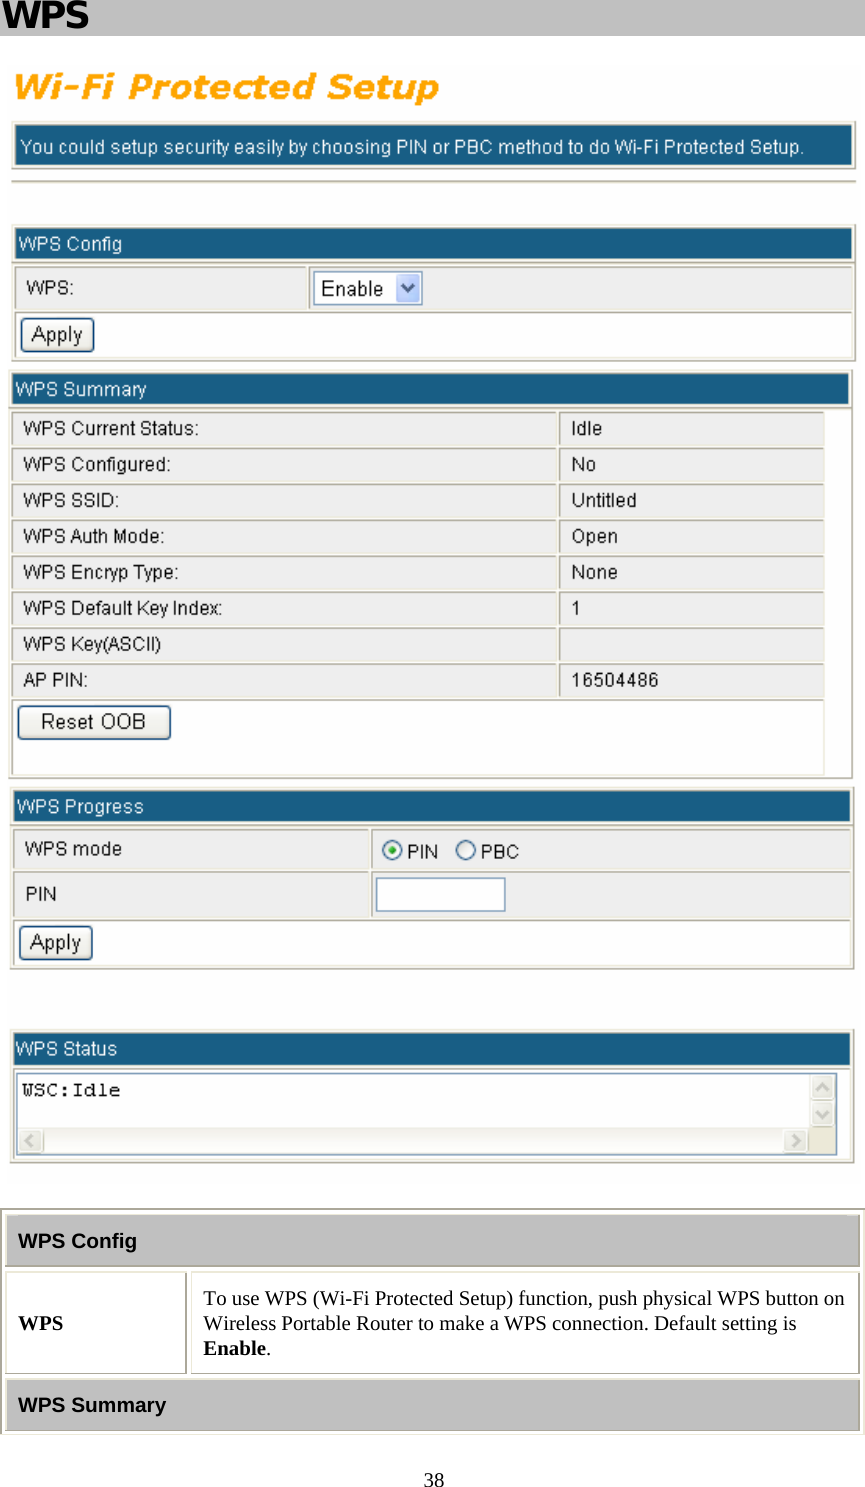   38WPS   WPS Config WPS  To use WPS (Wi-Fi Protected Setup) function, push physical WPS button on Wireless Portable Router to make a WPS connection. Default setting is Enable. WPS Summary 